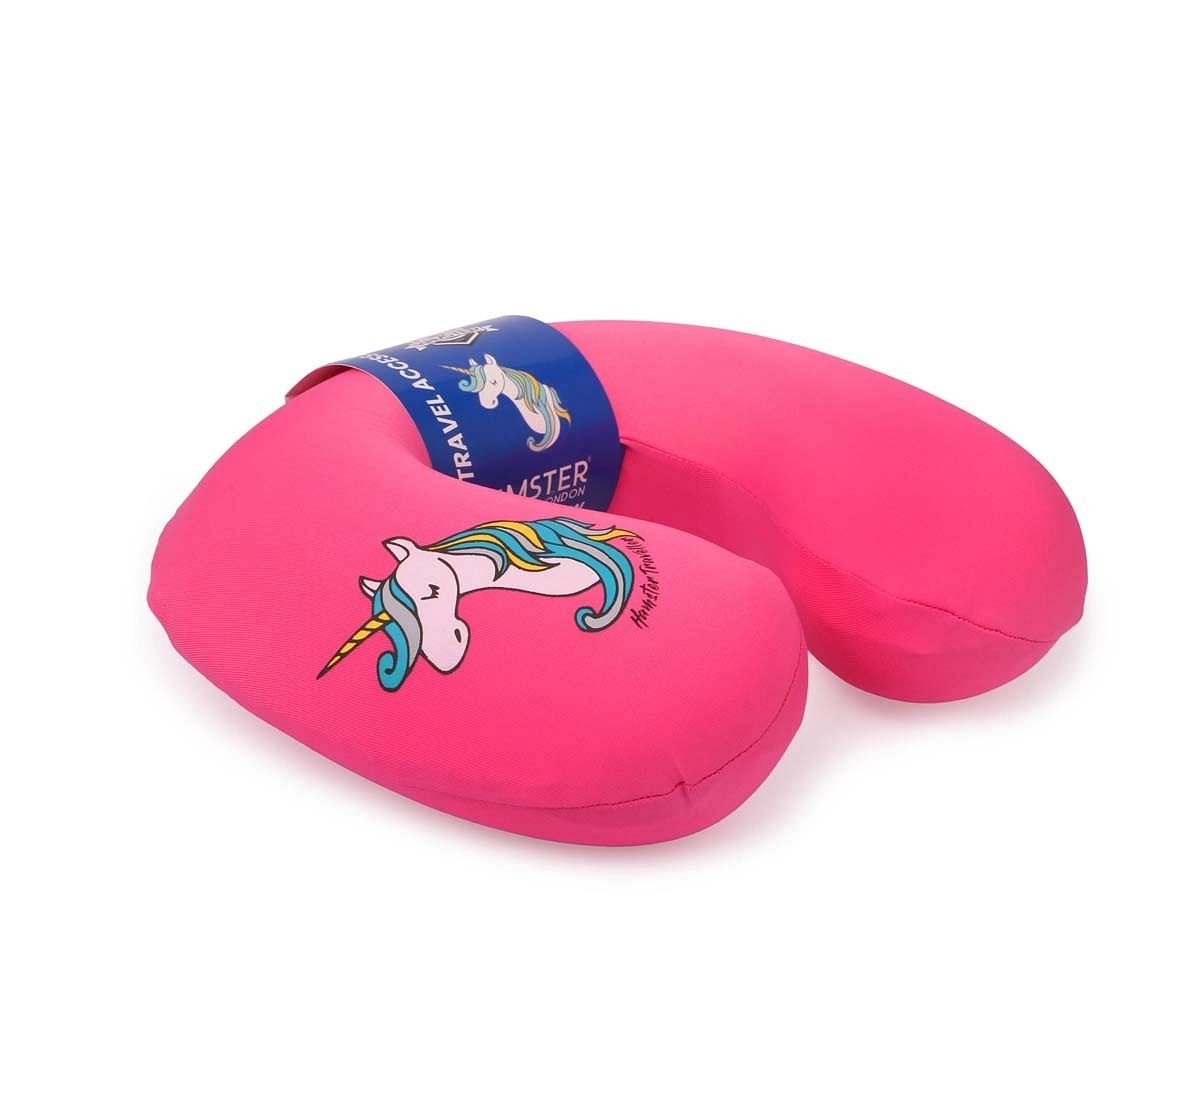 Hamster London Travel Pillow Unicorn Bags for Age 3Y+ (Pink)